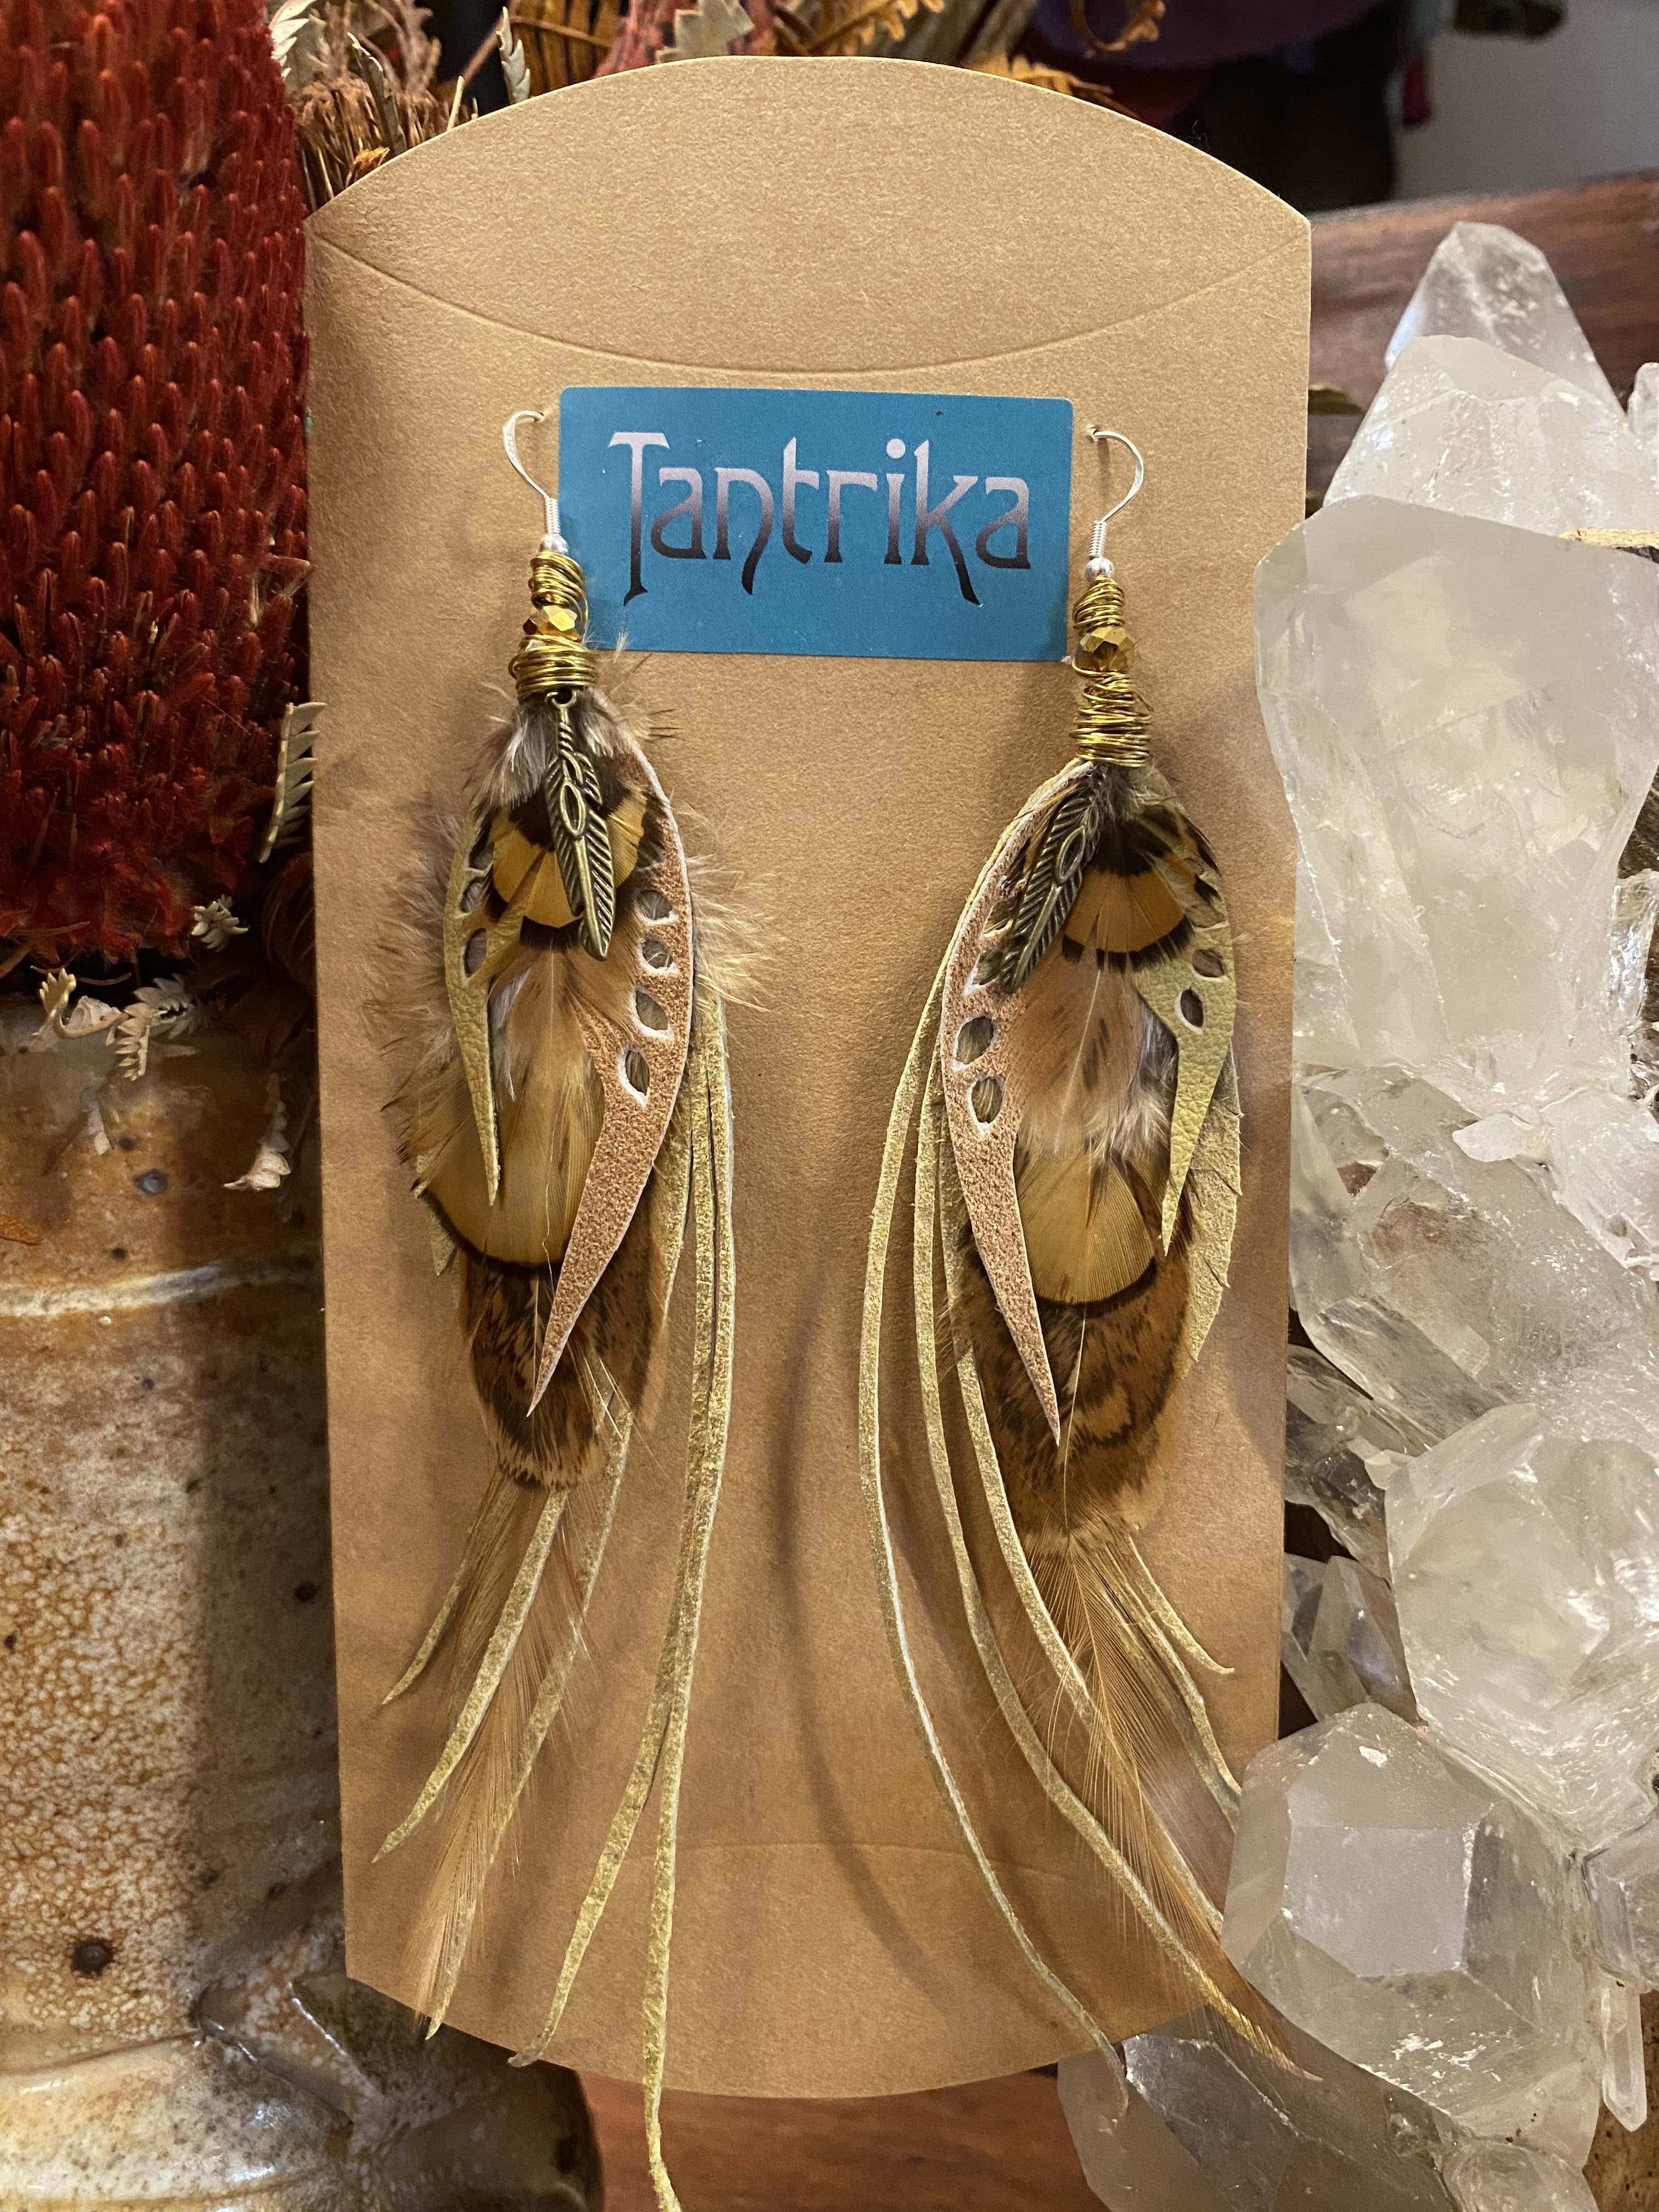 Feather & Leather earrings with silver hook, boho style upcyled and handmade jewellery found at Tantrika Australia